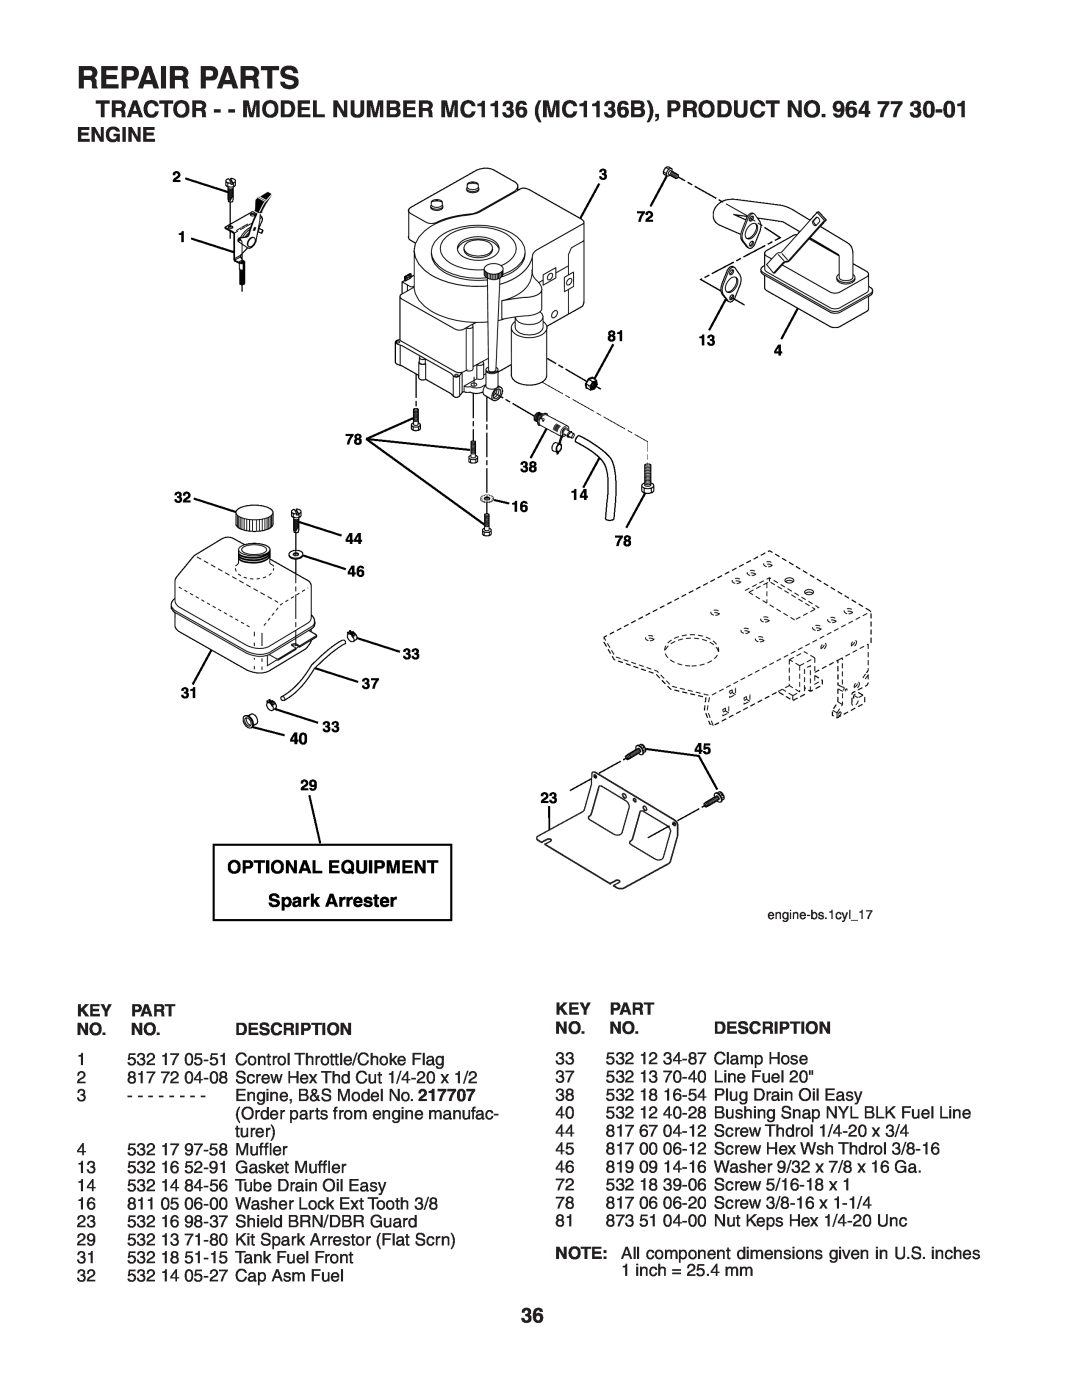 McCulloch manual Engine, Repair Parts, TRACTOR - - MODEL NUMBER MC1136 MC1136B, PRODUCT NO. 964 